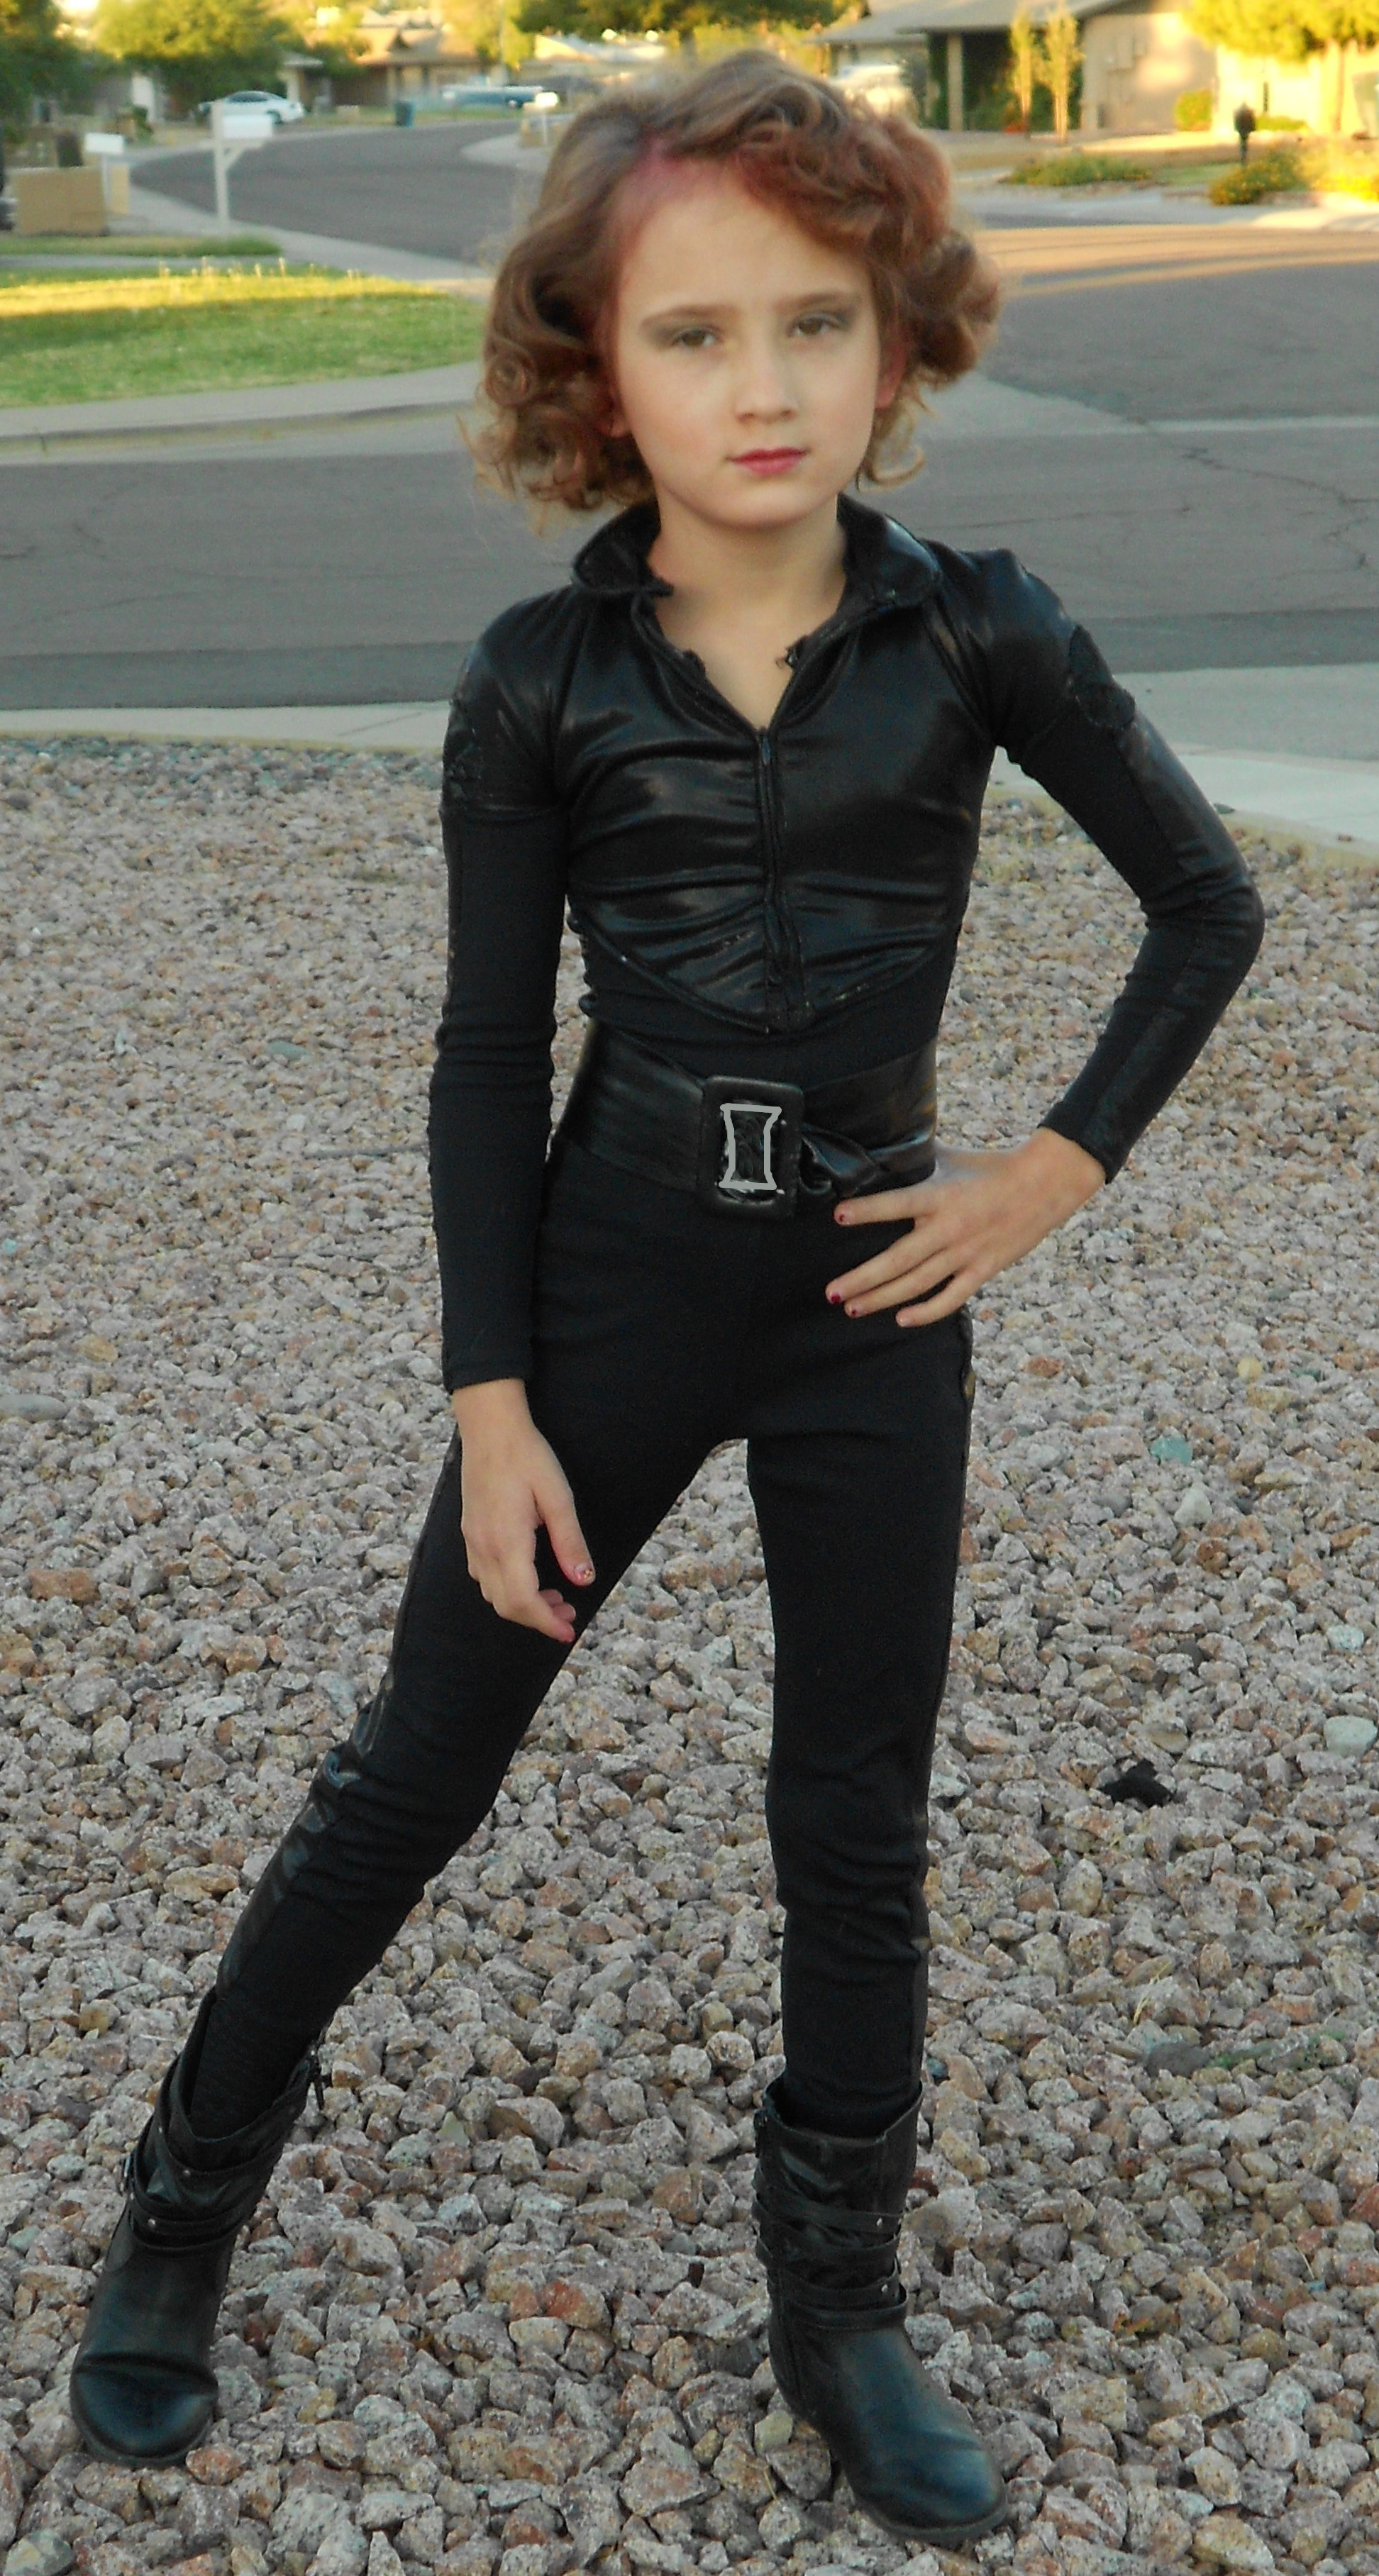 Black Widow Costume DIY
 Exclusively Mine – Costumes by Jen